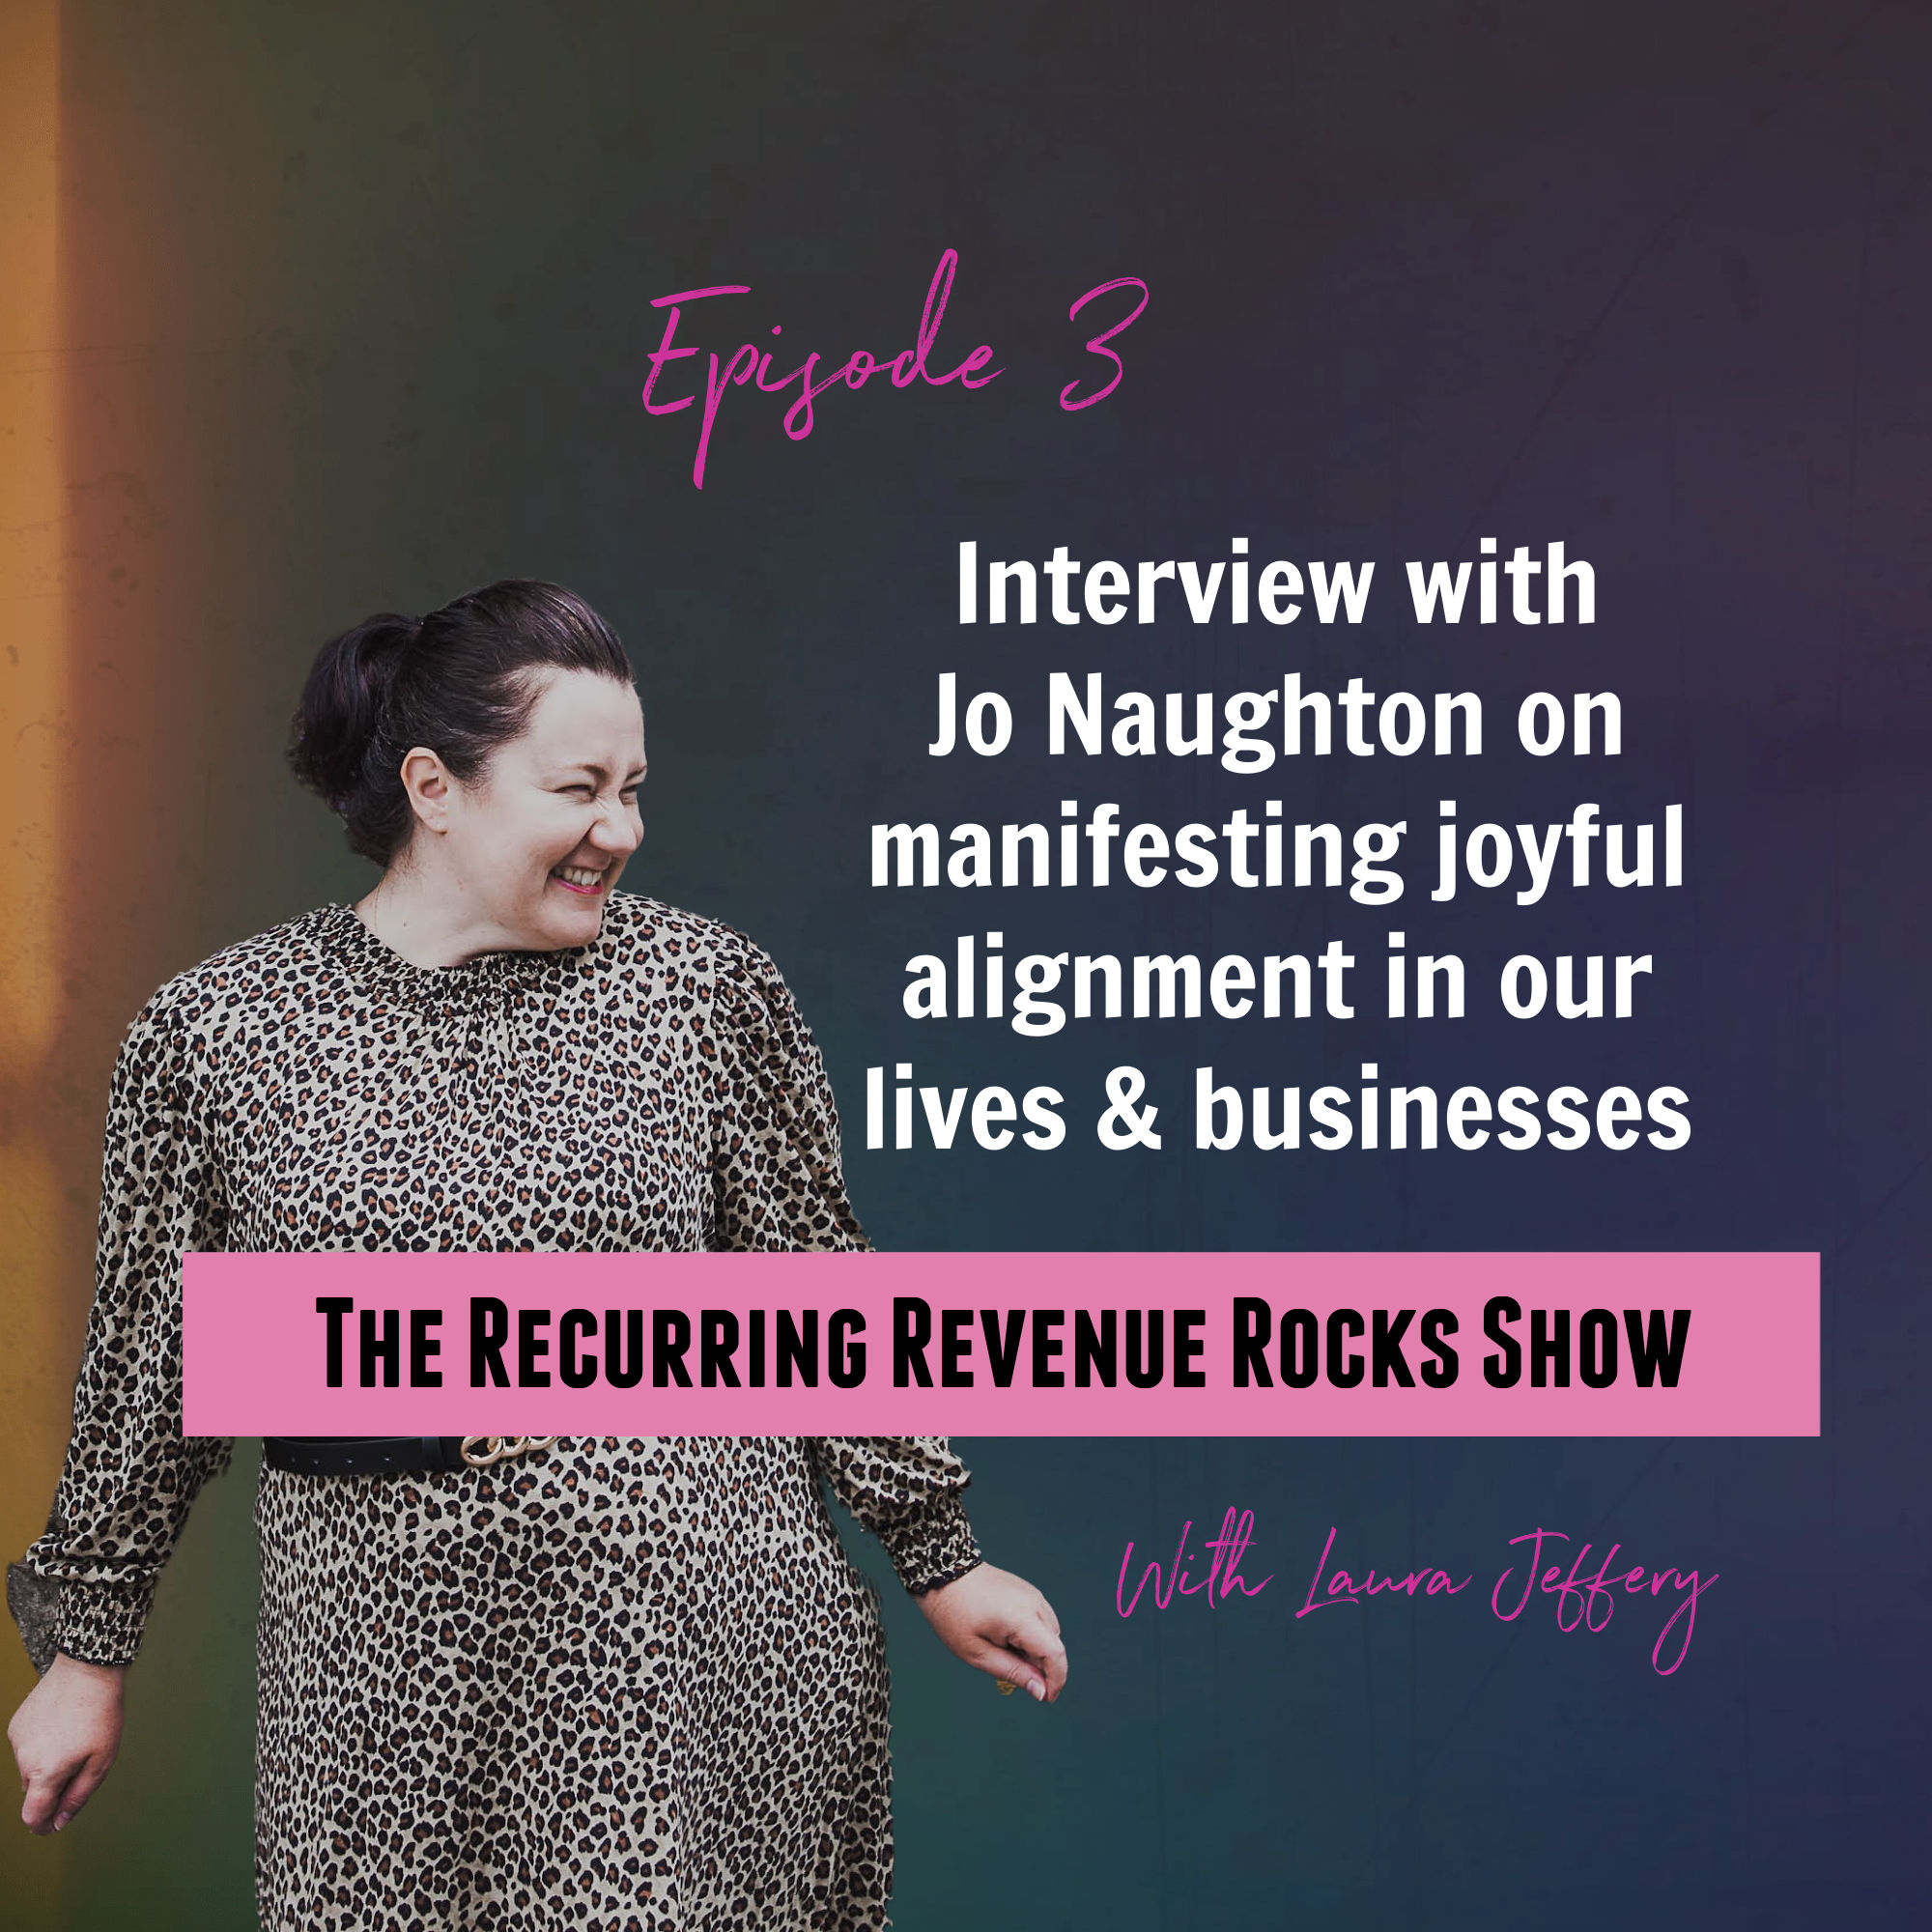 Manifesting joyful alignment in our lives and businesses – an interview with Jo Naughton